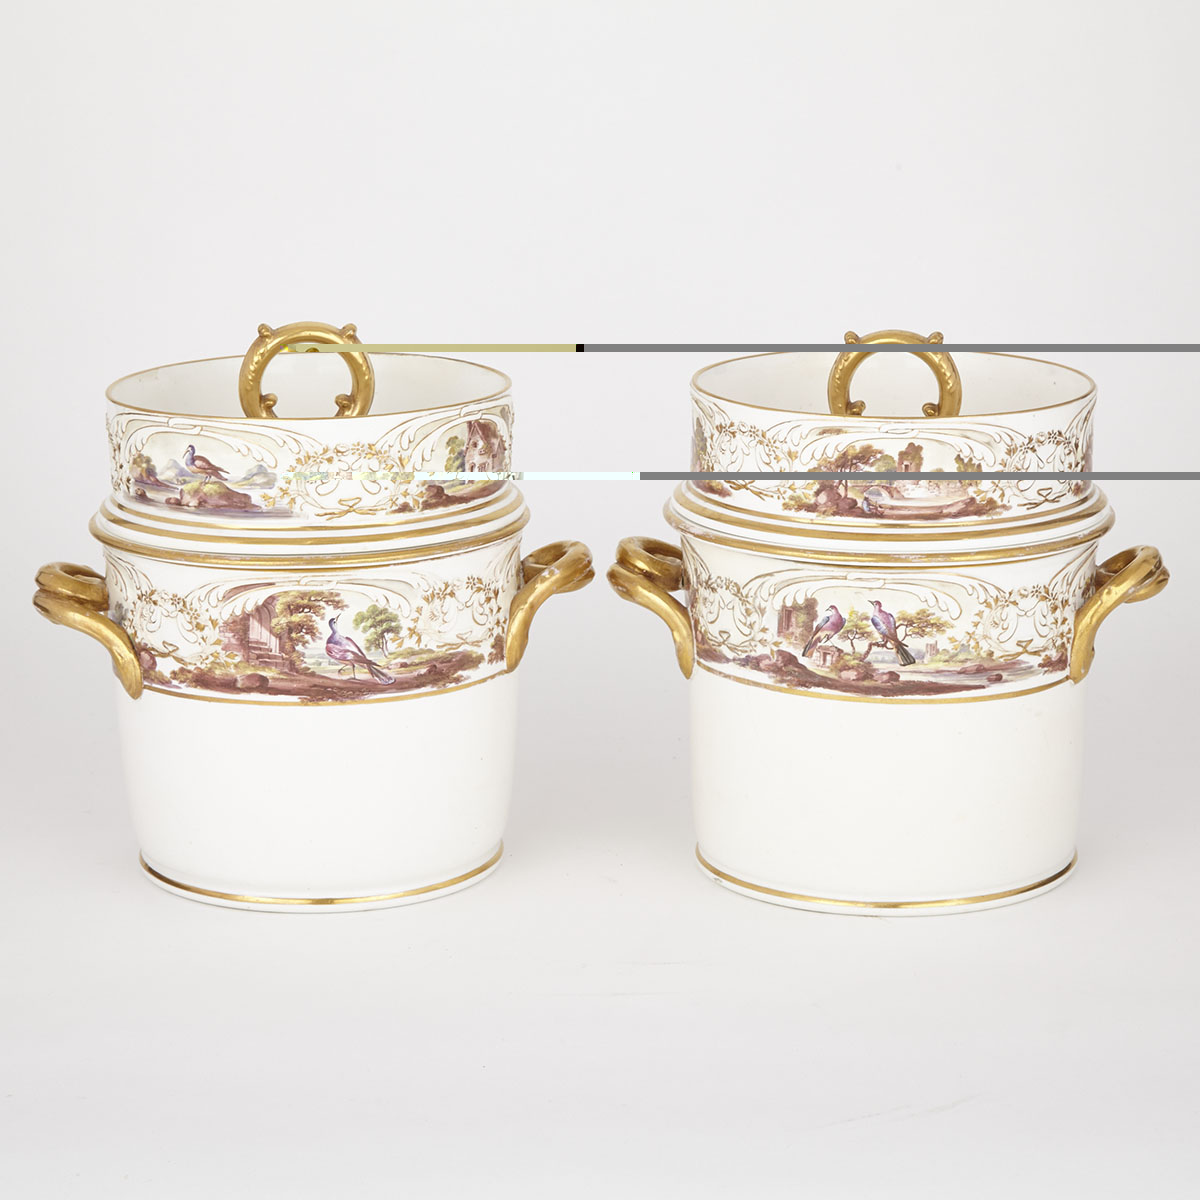 Pair of English Porcelain Fruit Coolers with Covers and Liners, c.1820